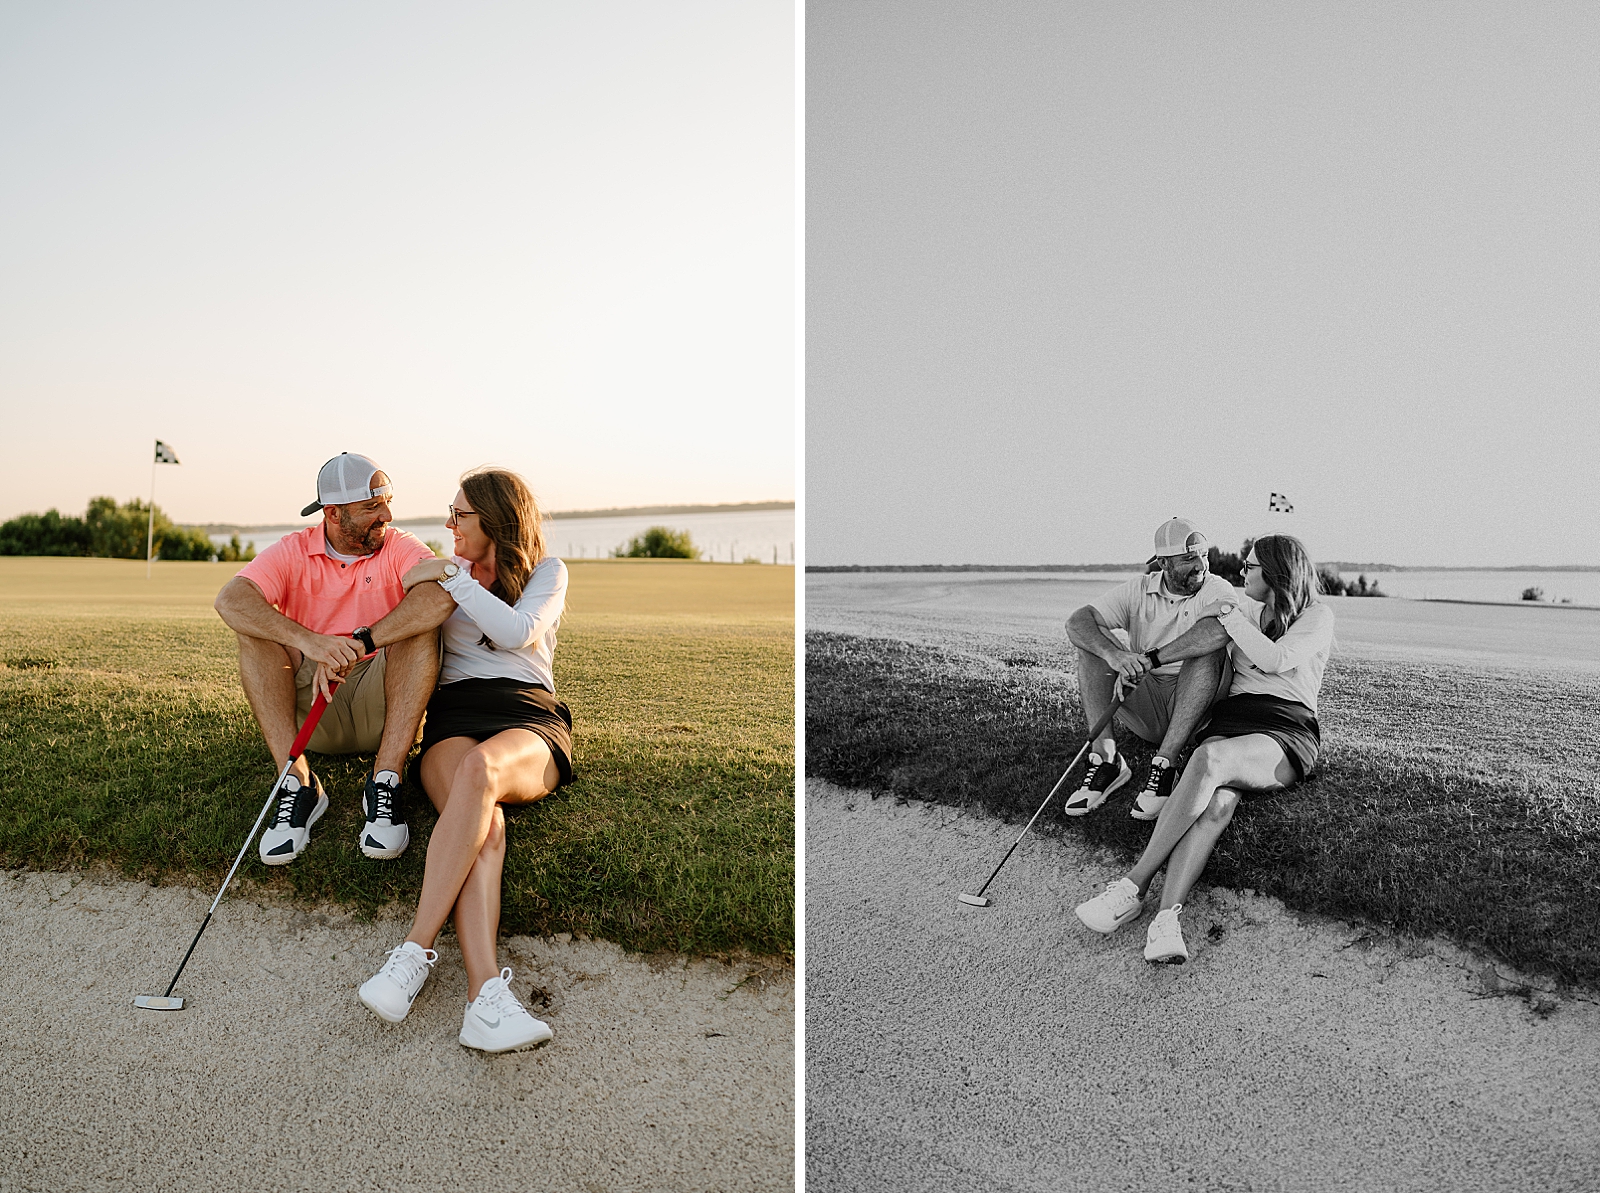 side by side images of couple sitting on golf course with golf club, one in black and white and one in color